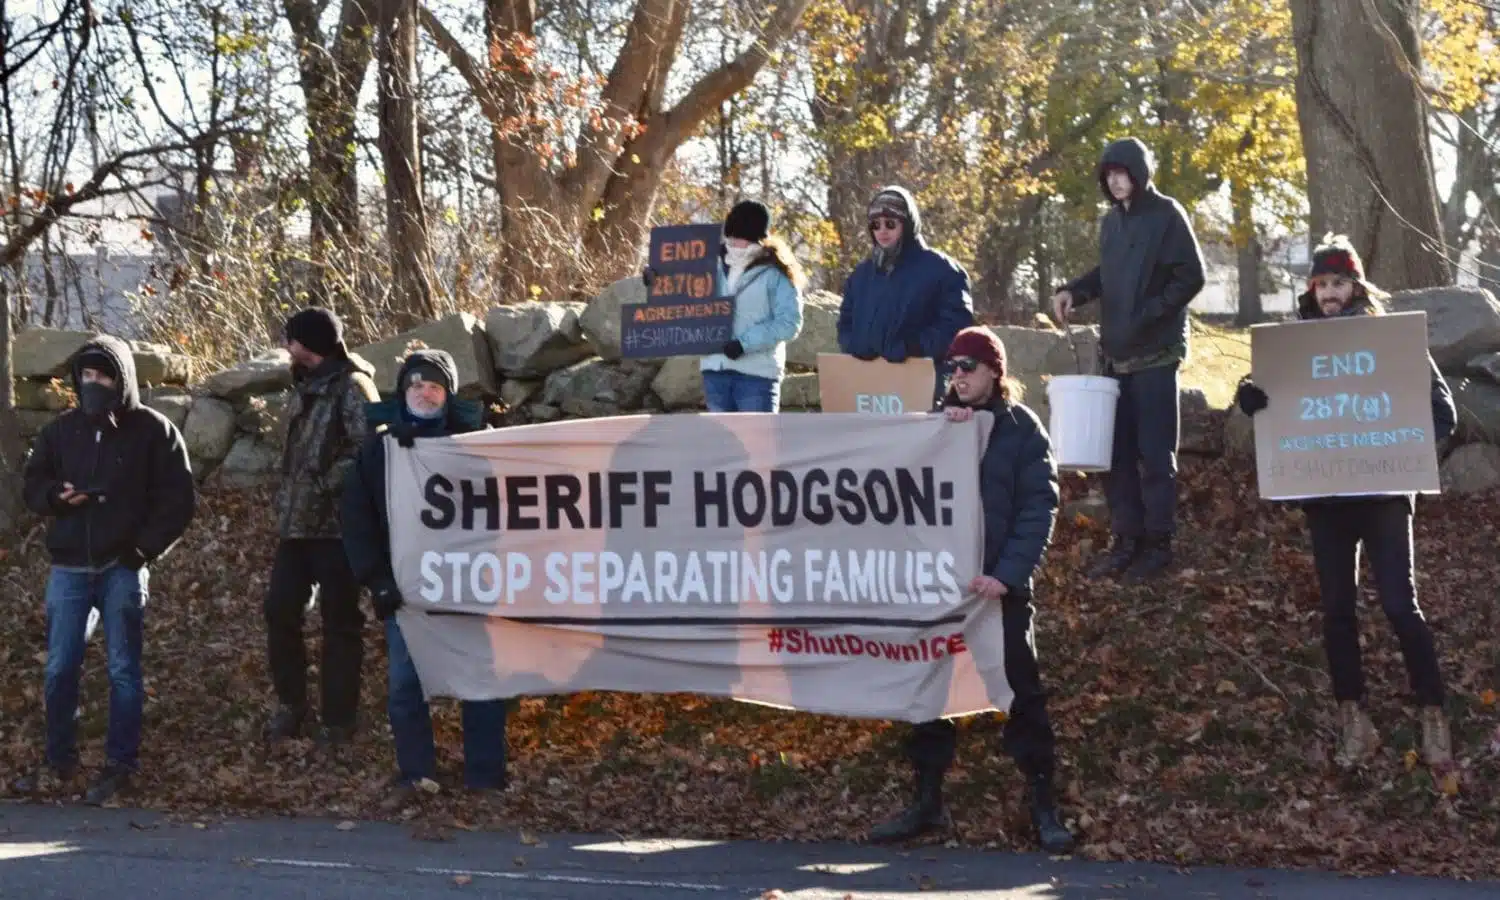 Sheriff Hodgson helps ICE separate families, earns protesters outside his home on Thanksgiving